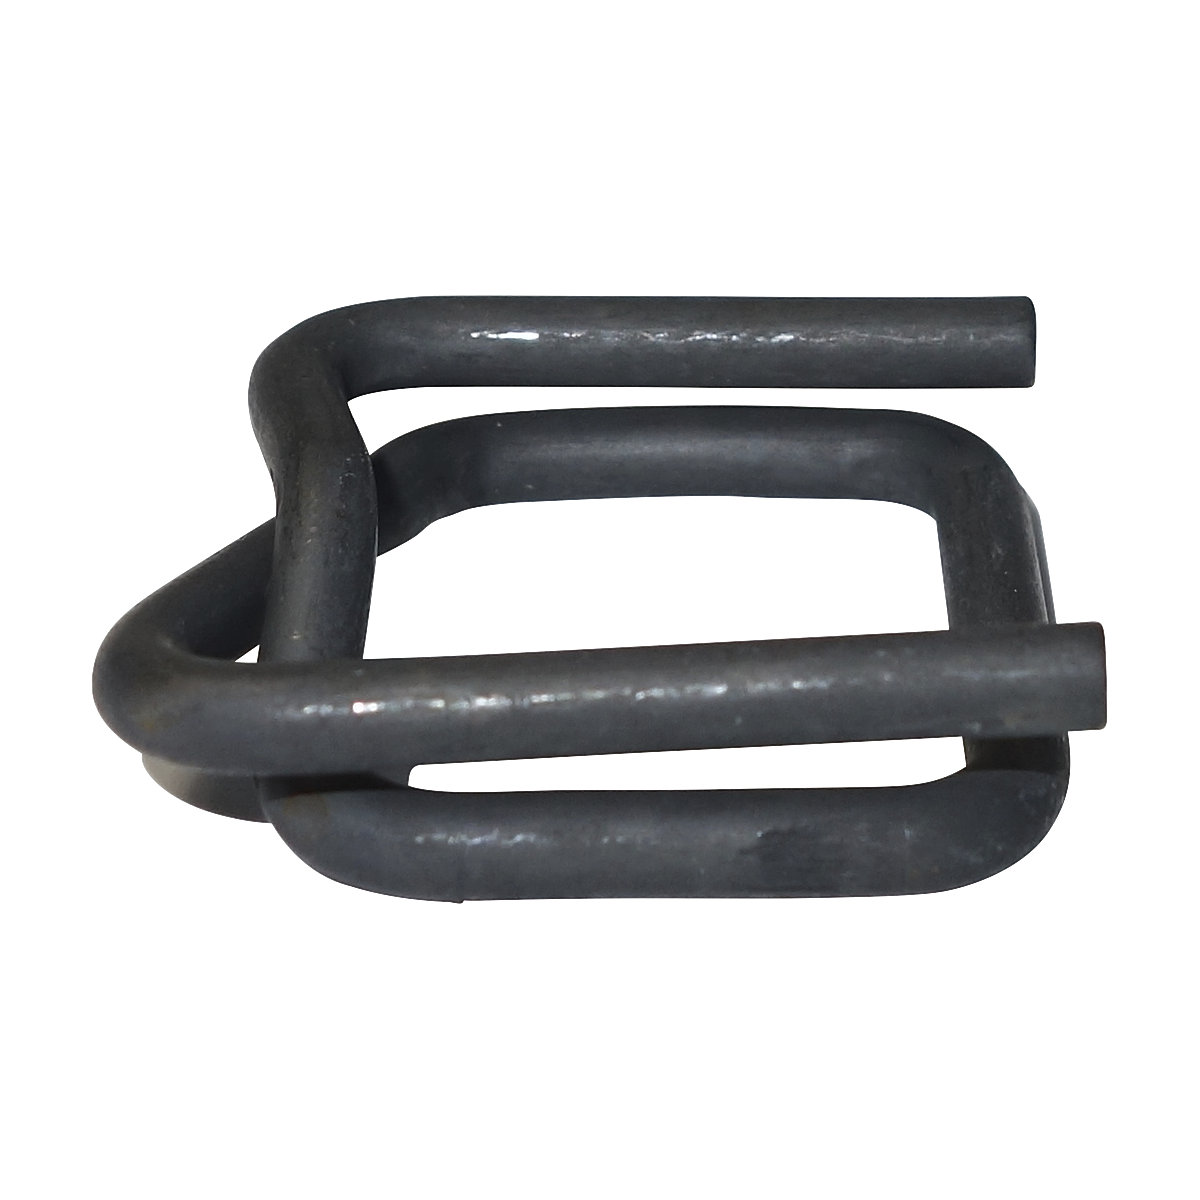 Fastening clips, phosphate coated, for composite strapping or reinforced PET strapping, width 16 mm, pack of 1000-5